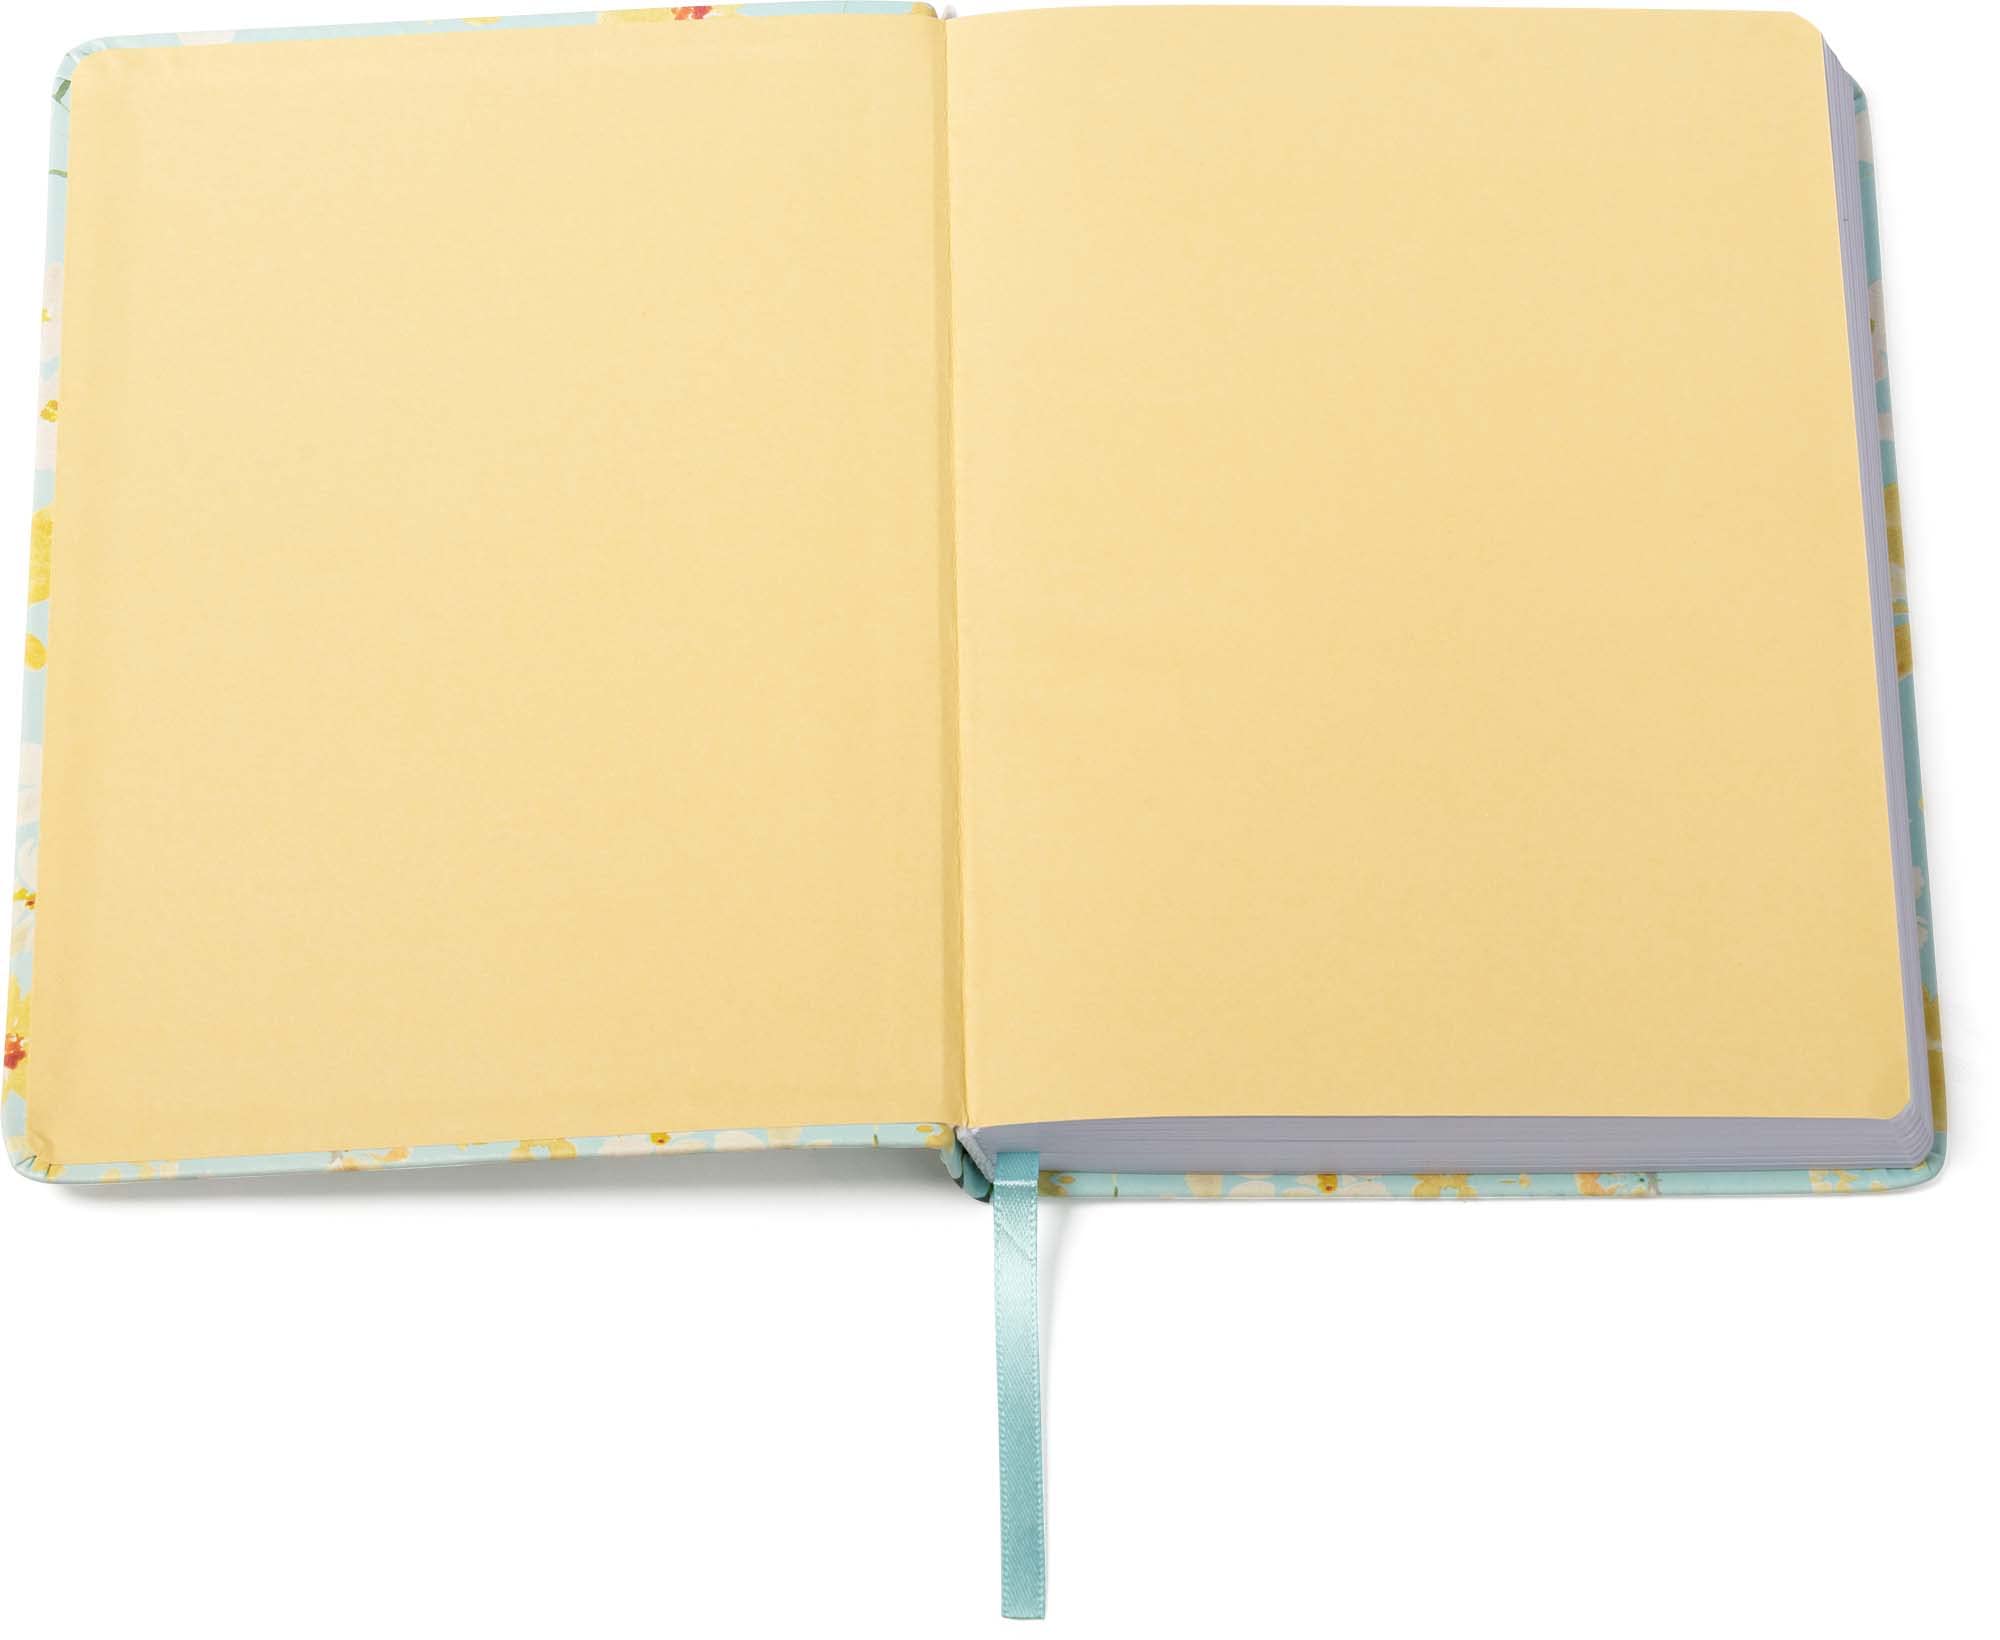 Eccolo Medium Sized Floral Notes Journal